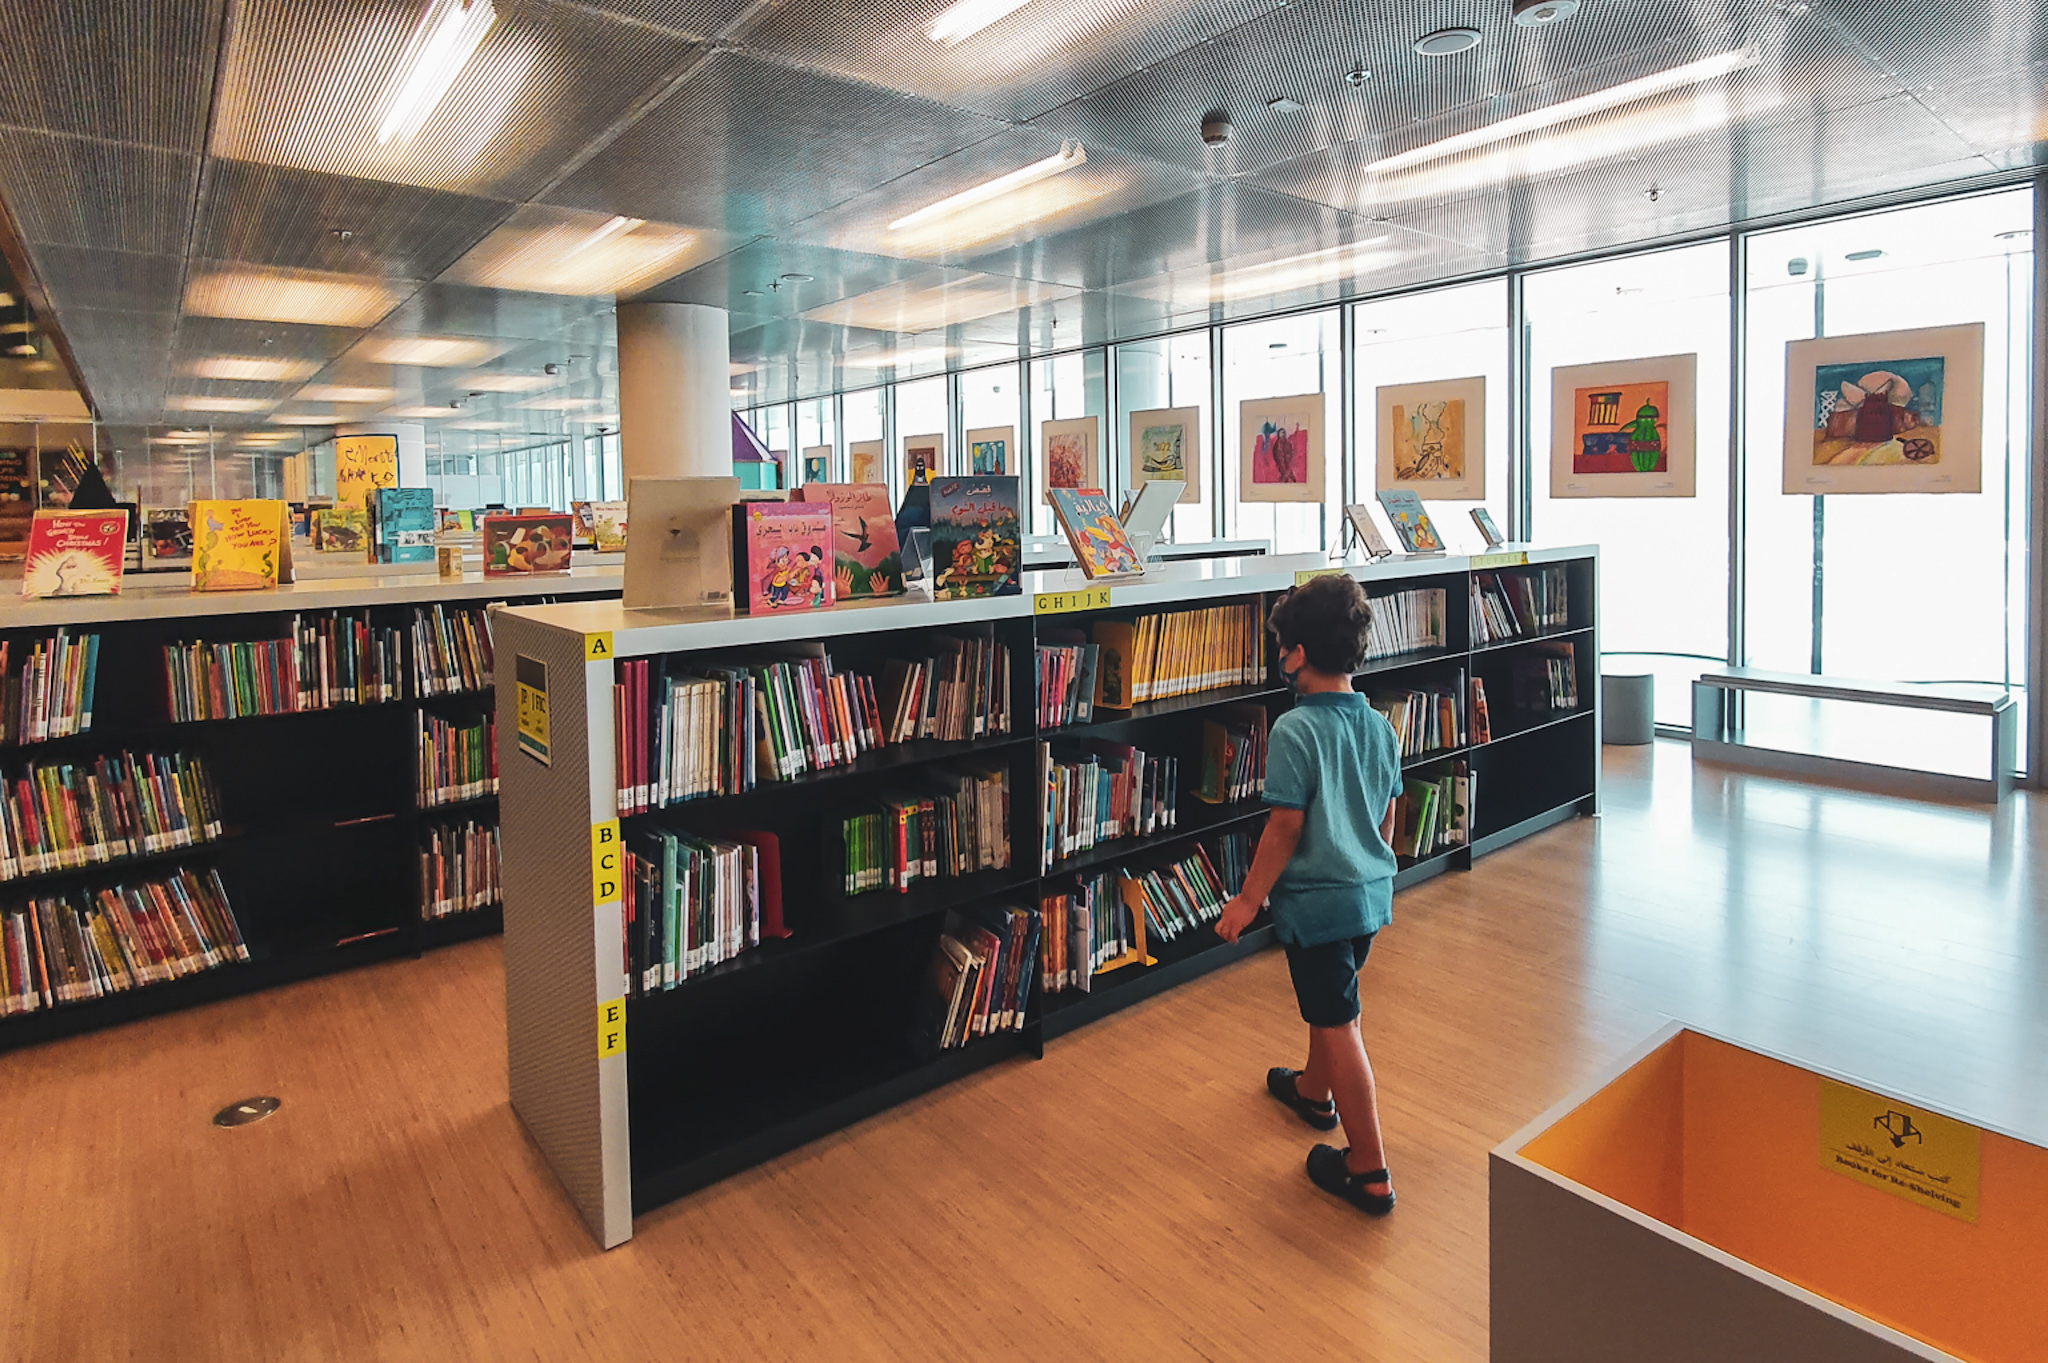 We visited the Children’s Library in Doha, and here’s everything you need to know about it.